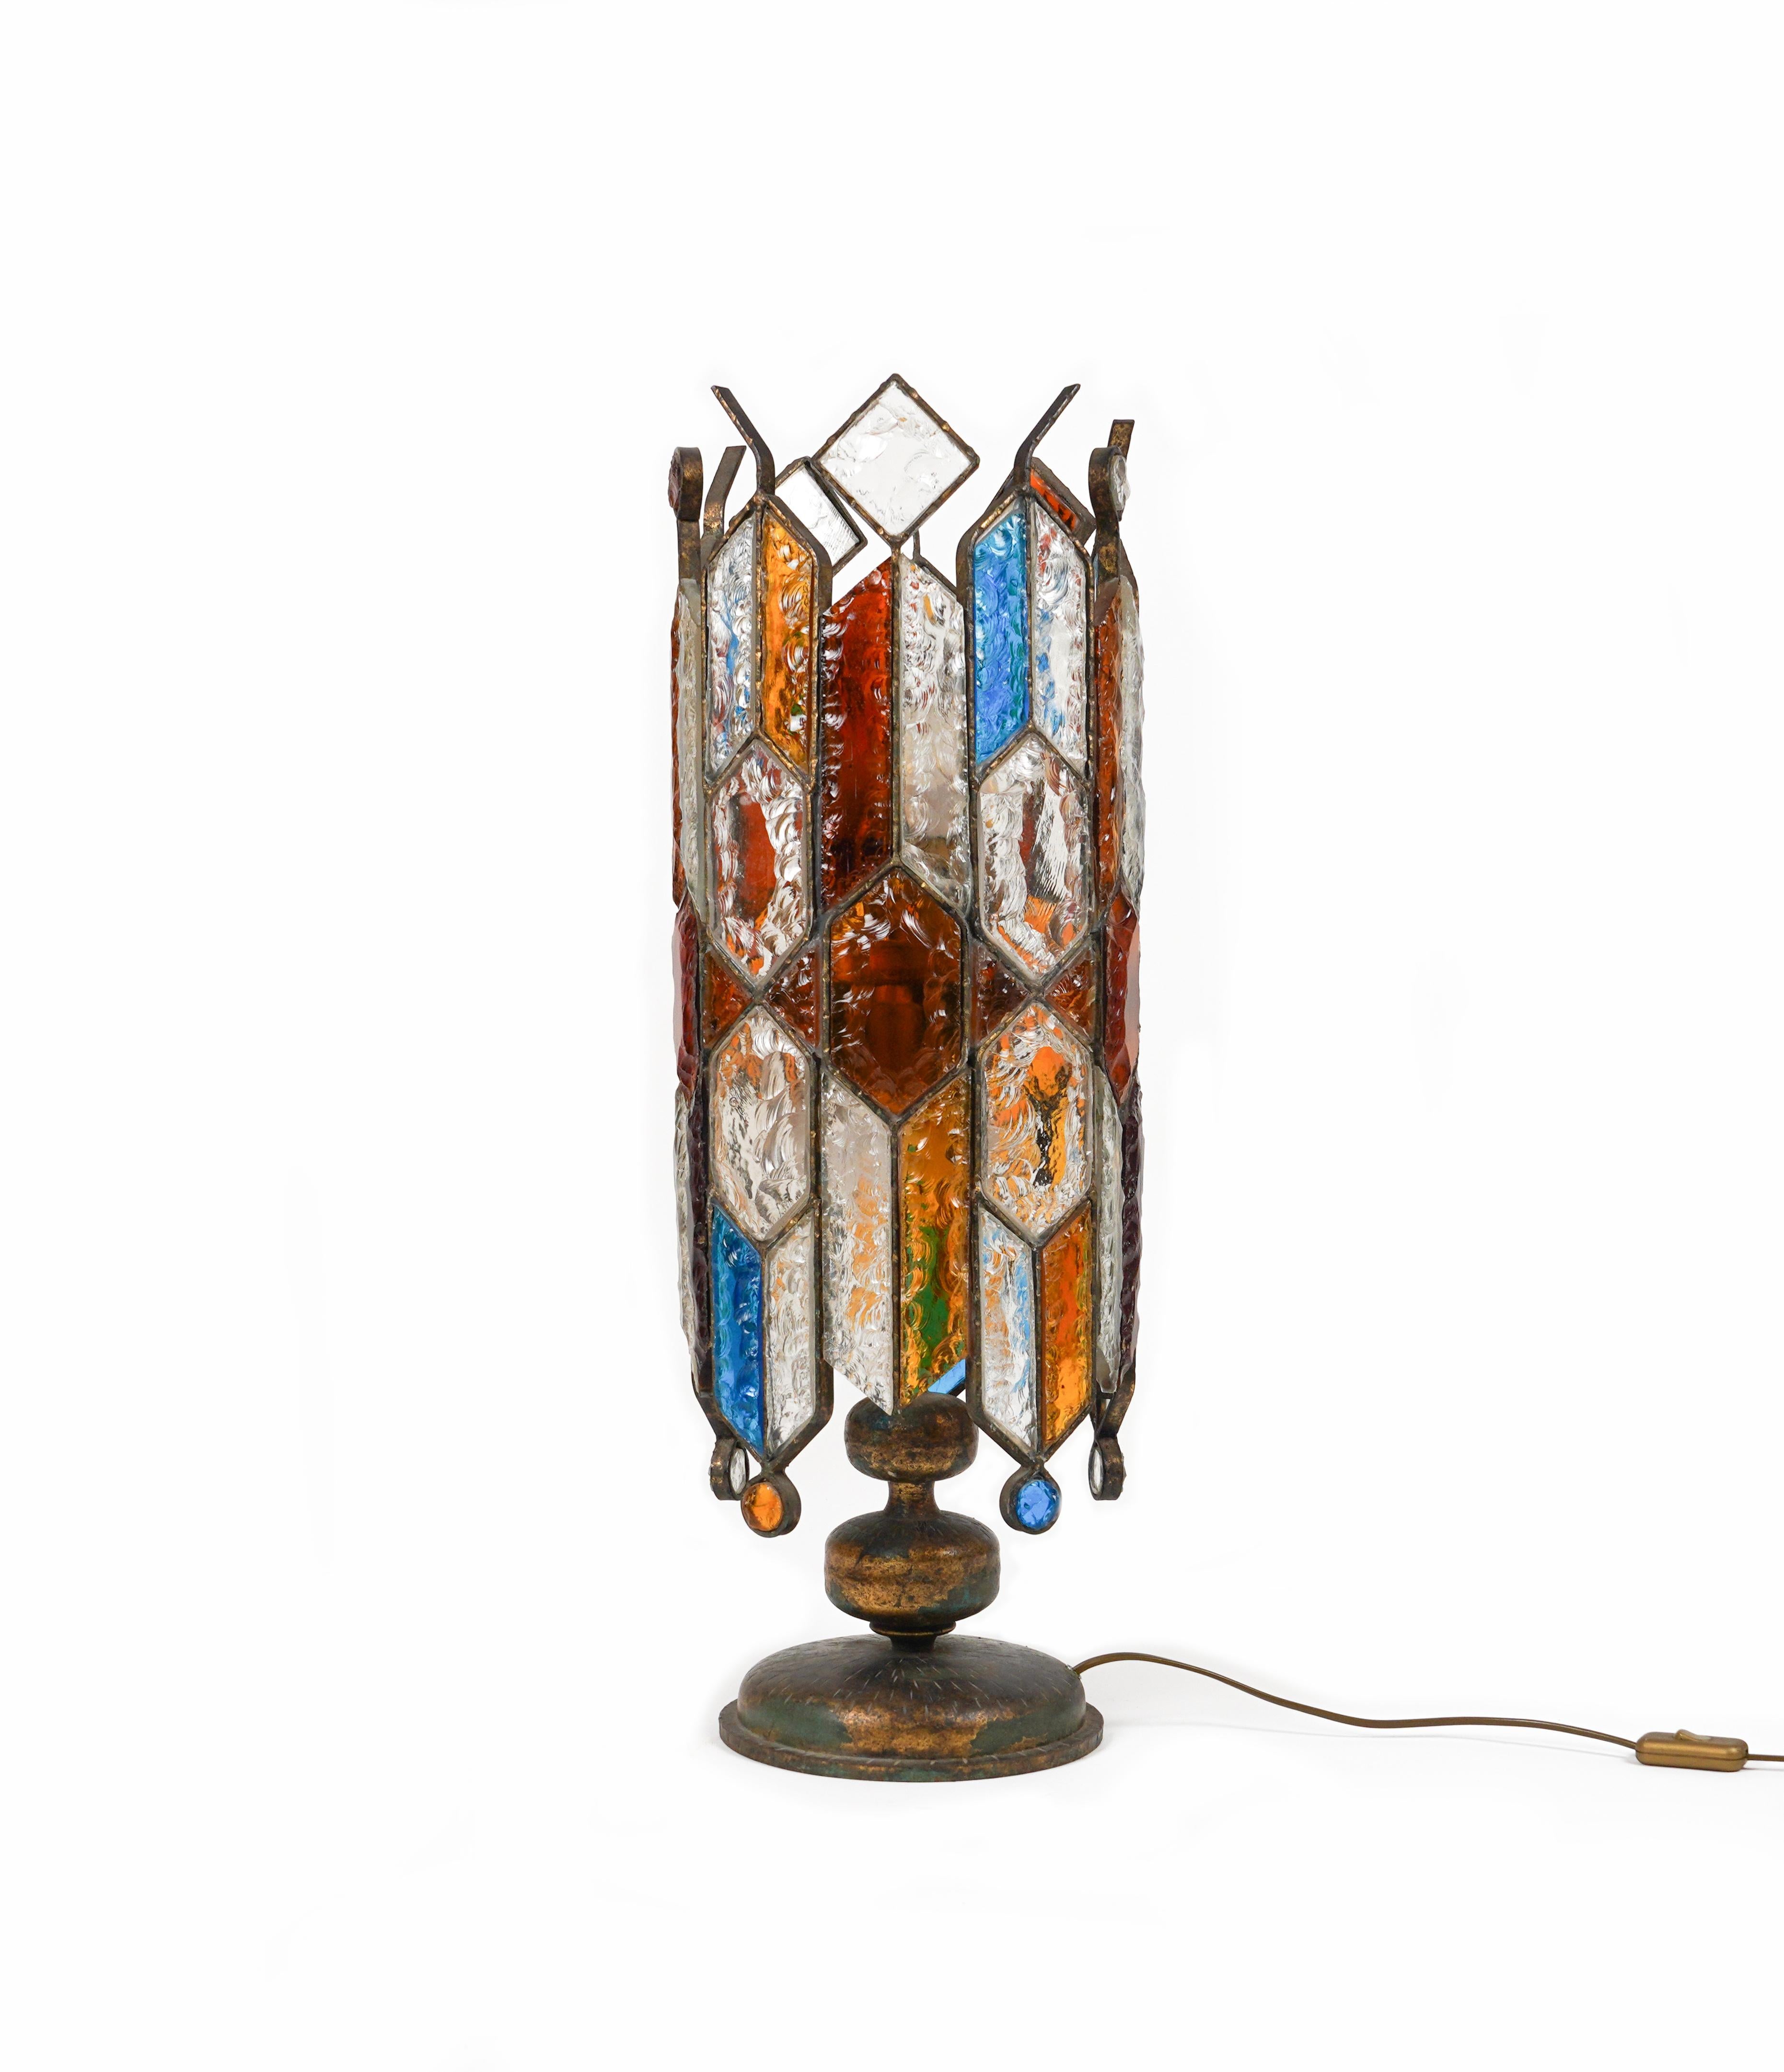 Table or Floor Lamp Wrought Iron and Hammered Glass by Longobard, Italy, 1970s For Sale 1